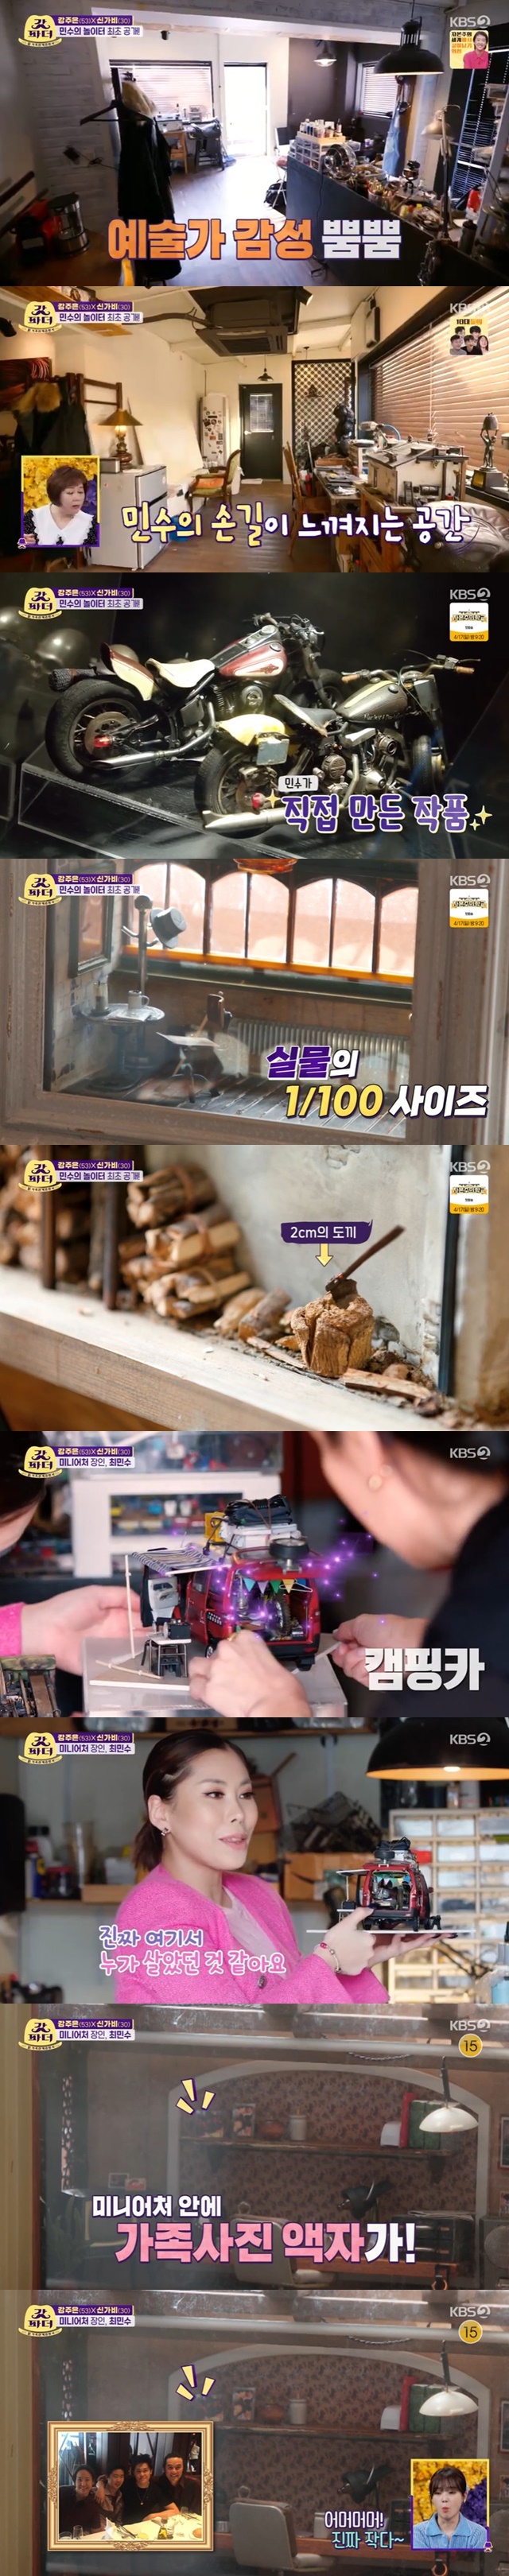 Choi Min-soos workshop was first unveiled.In KBS 2TV The Last Godfather broadcast on April 13, Kang Joo-eun visited her husband Choi Min-soos workshop with GABEE.On the same day, Kang Ju-eun said, My husband wanted to meet his daughter GABEE, so I made a place. My mother can not come often. It was not funny.When Kang Ju-eun and GABEE arrived, Choi Min-soo laughed at GABEE, saying, Hello scallops.At the same time, Choi Min-soos workshop was filled with works made by Choi Min-soo, full of artist sensibility.Choi Min-soo worked on a 1/100 size miniature of real life, including a small camper and house model that really looked like a man to live in.GABEE admired the camper car and said, I think someone really lived here. I was surprised to see the smaller Choi Min-soo and Kang Joo-euns Family photos in a small house model.Choi Min-soo said, My mother told me to put it on. If I do not, I will kill it.I wanted to make my mother small and put it in my mind and lock it down. My wife, Kang Ju-eun, laughed at the announcement that she made a photo of a mini-family.